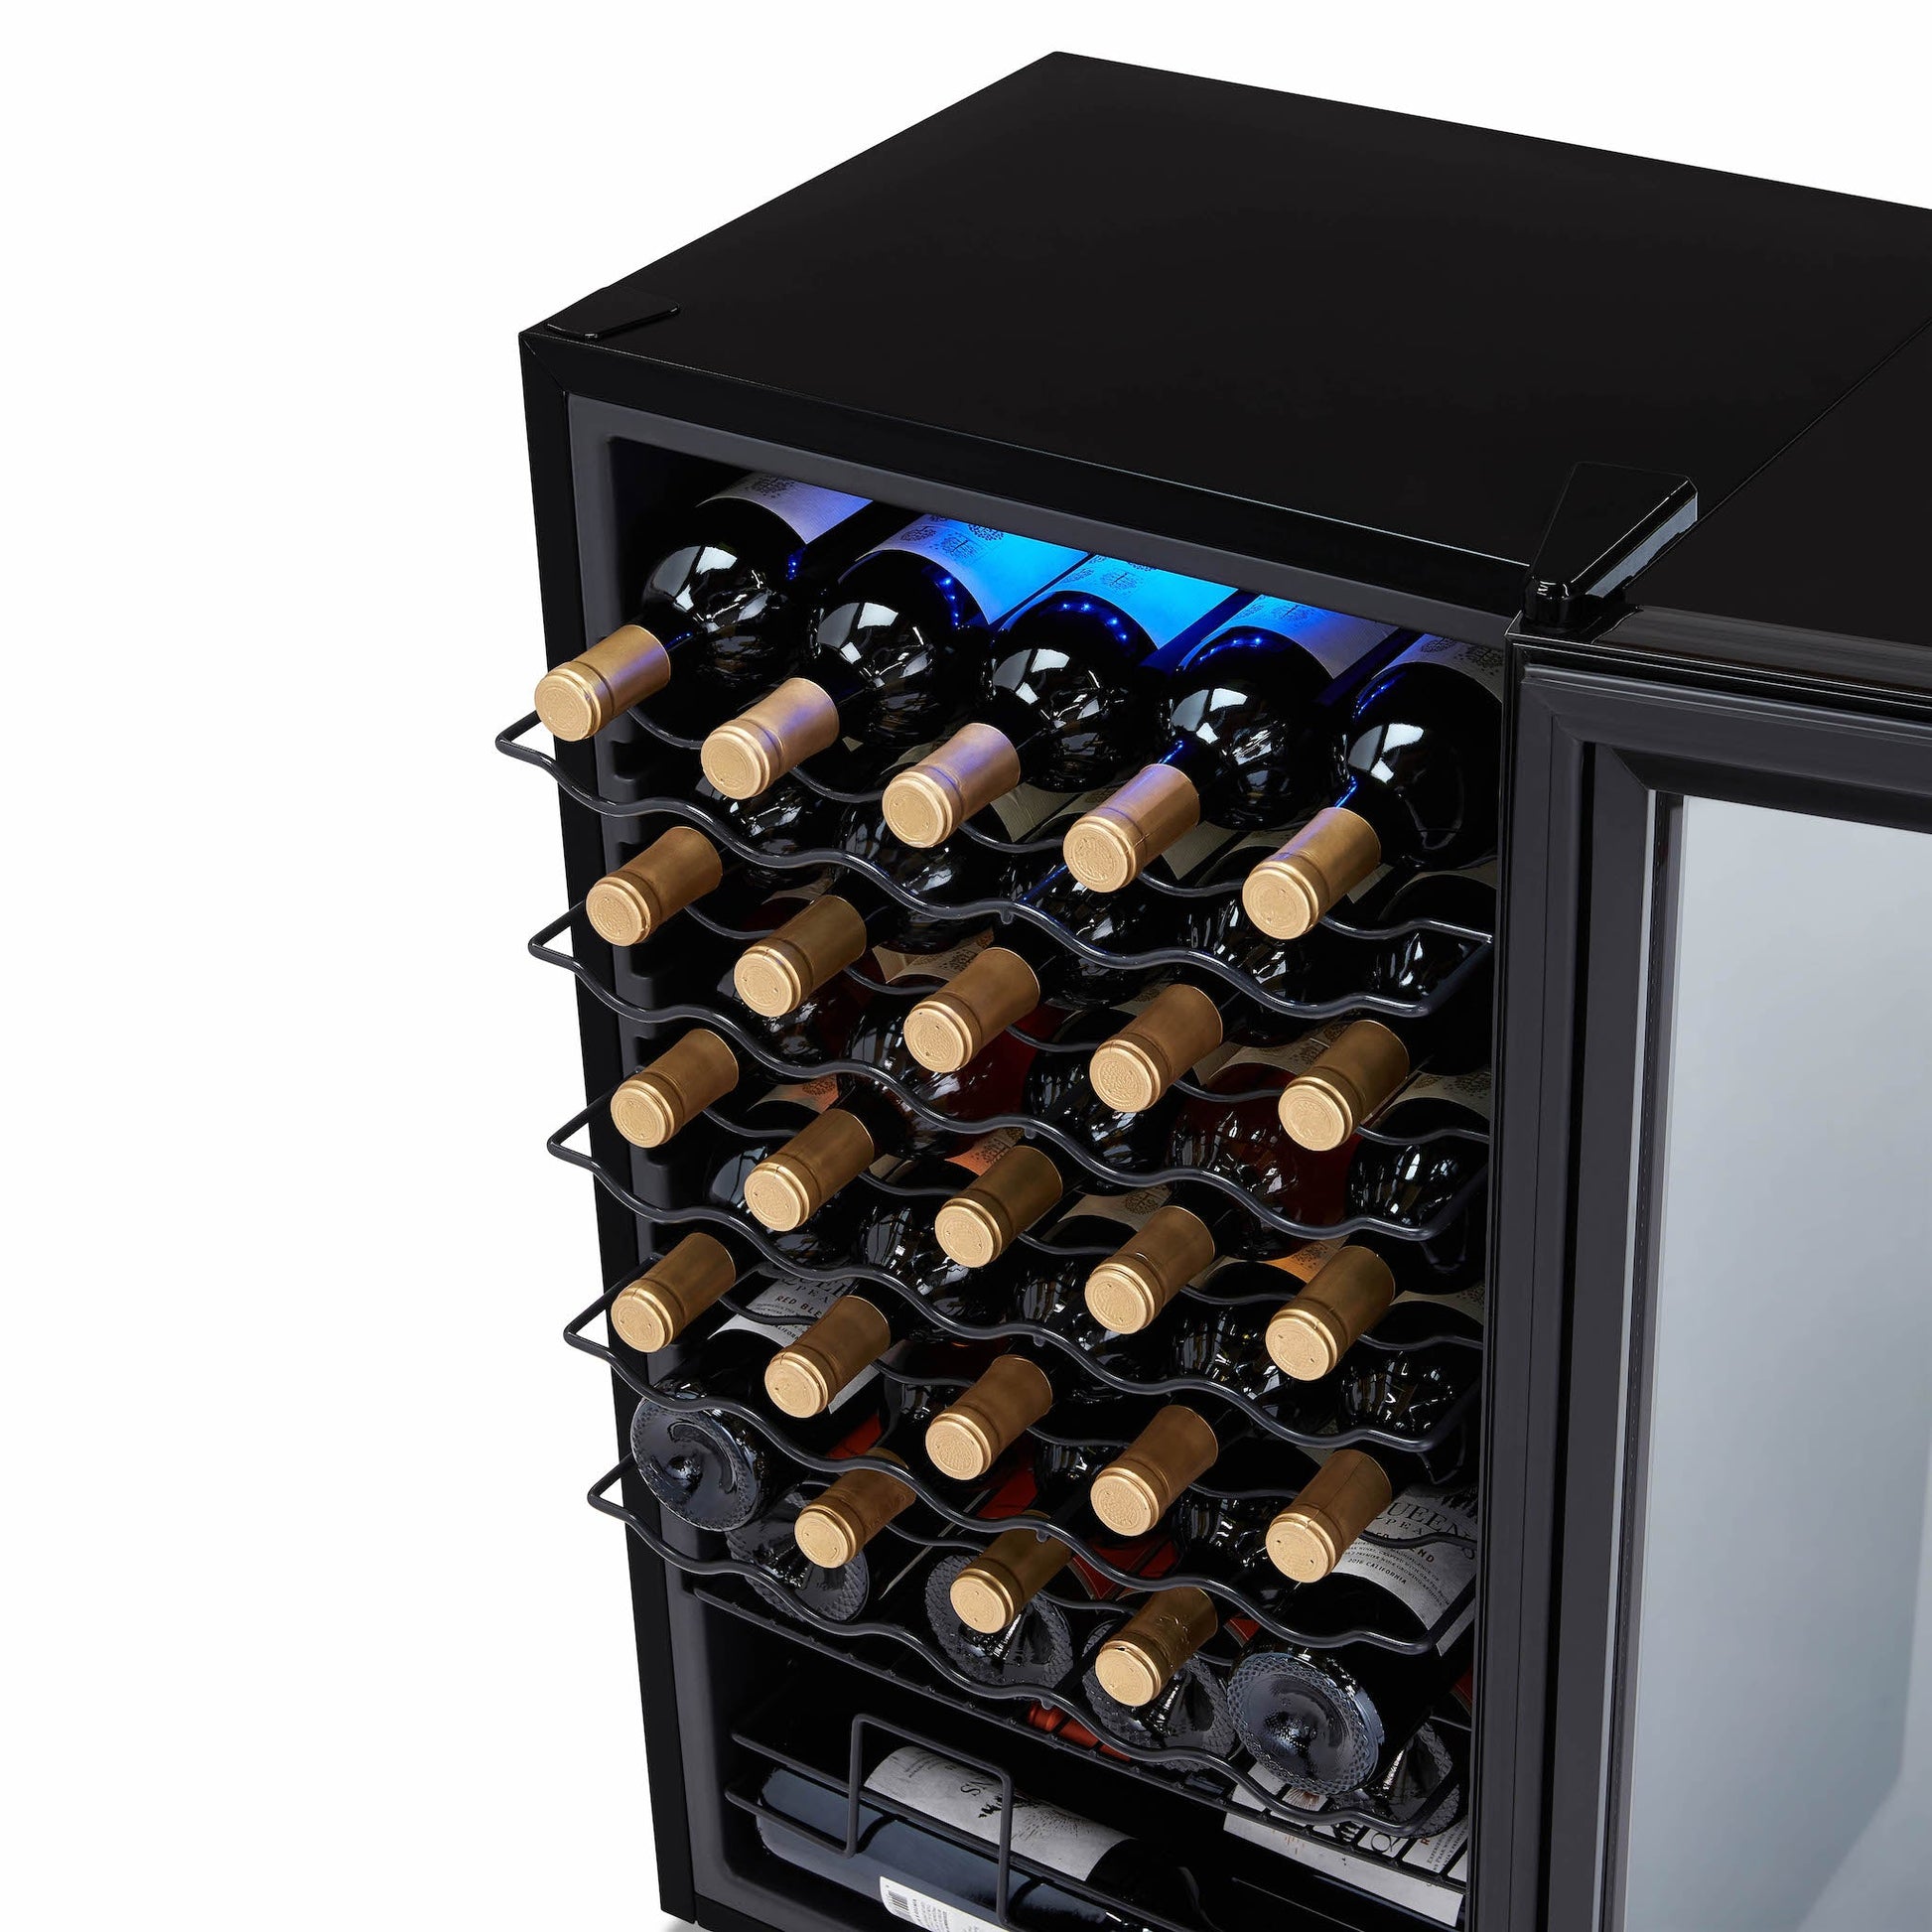 Newair® Shadow?? Series Wine Cooler Refrigerator 34 Bottle, Freestanding Mirrored Wine Fridge with Double-Layer Tempered Glass Door & Compressor Cooling for Reds, Whites, and Sparkling Wine, 41f-64f Digital Temperature Control